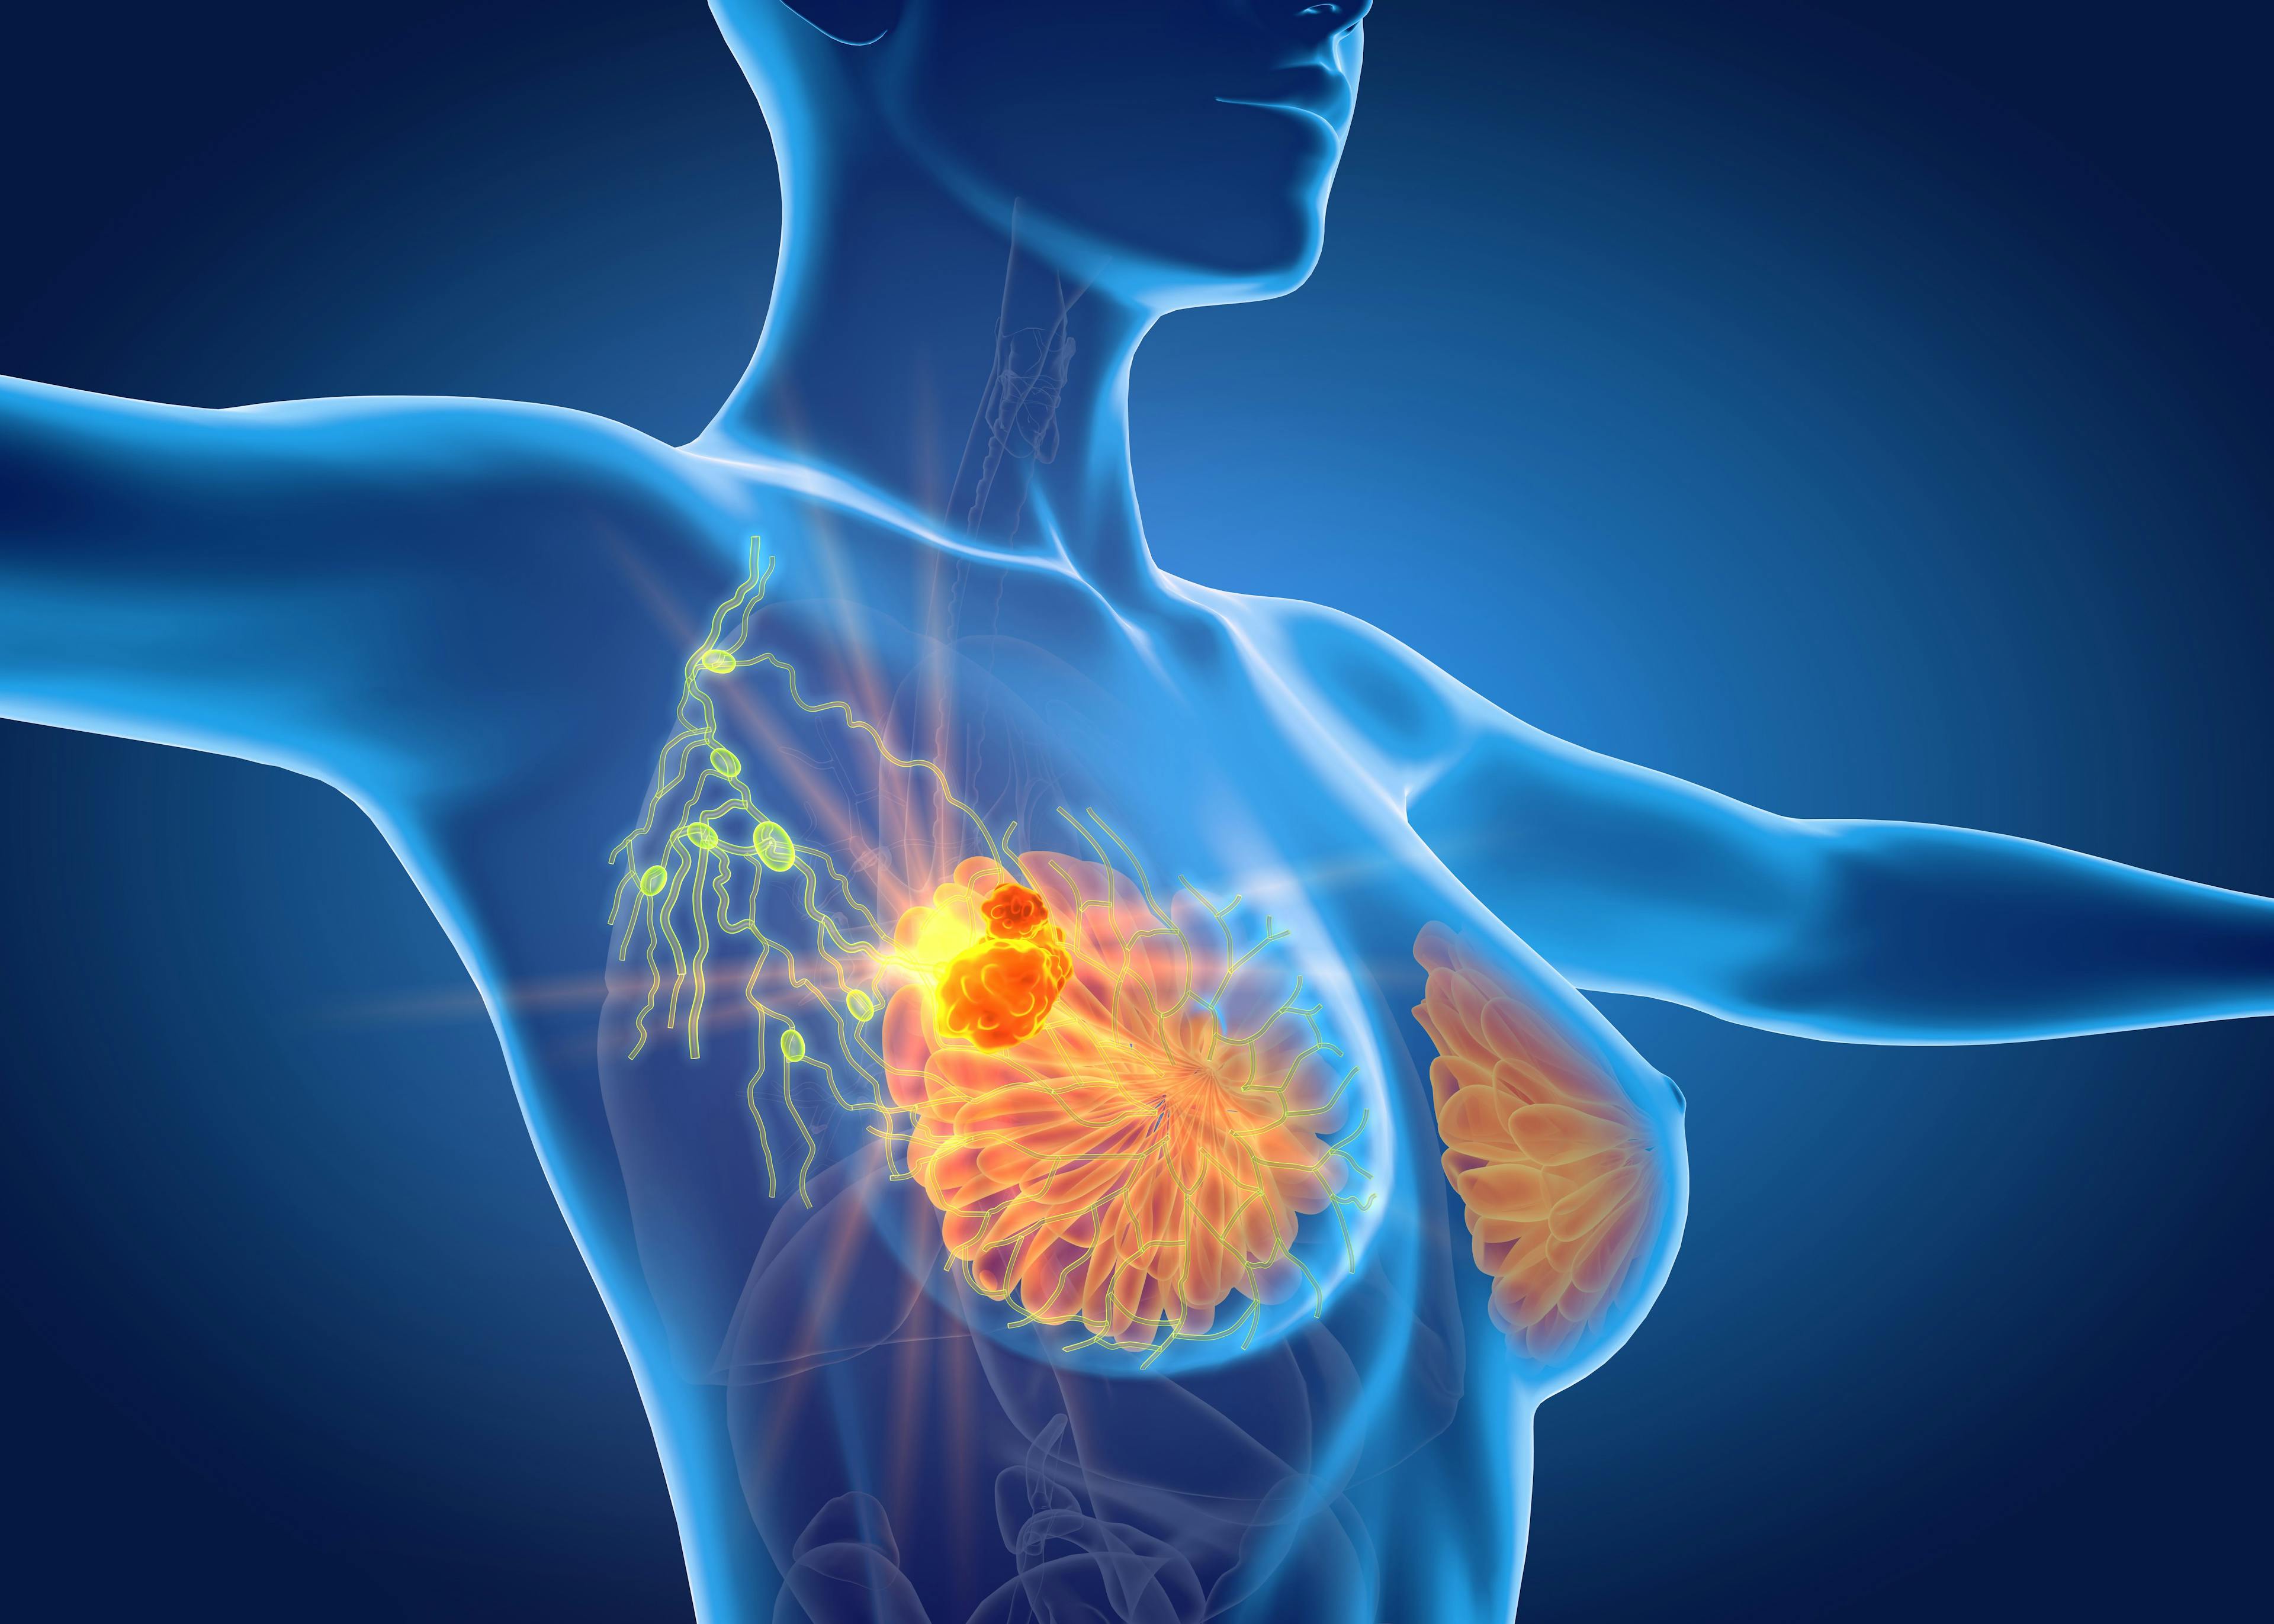 Under-Recognition of Symptoms Common in Patients With Breast Cancer